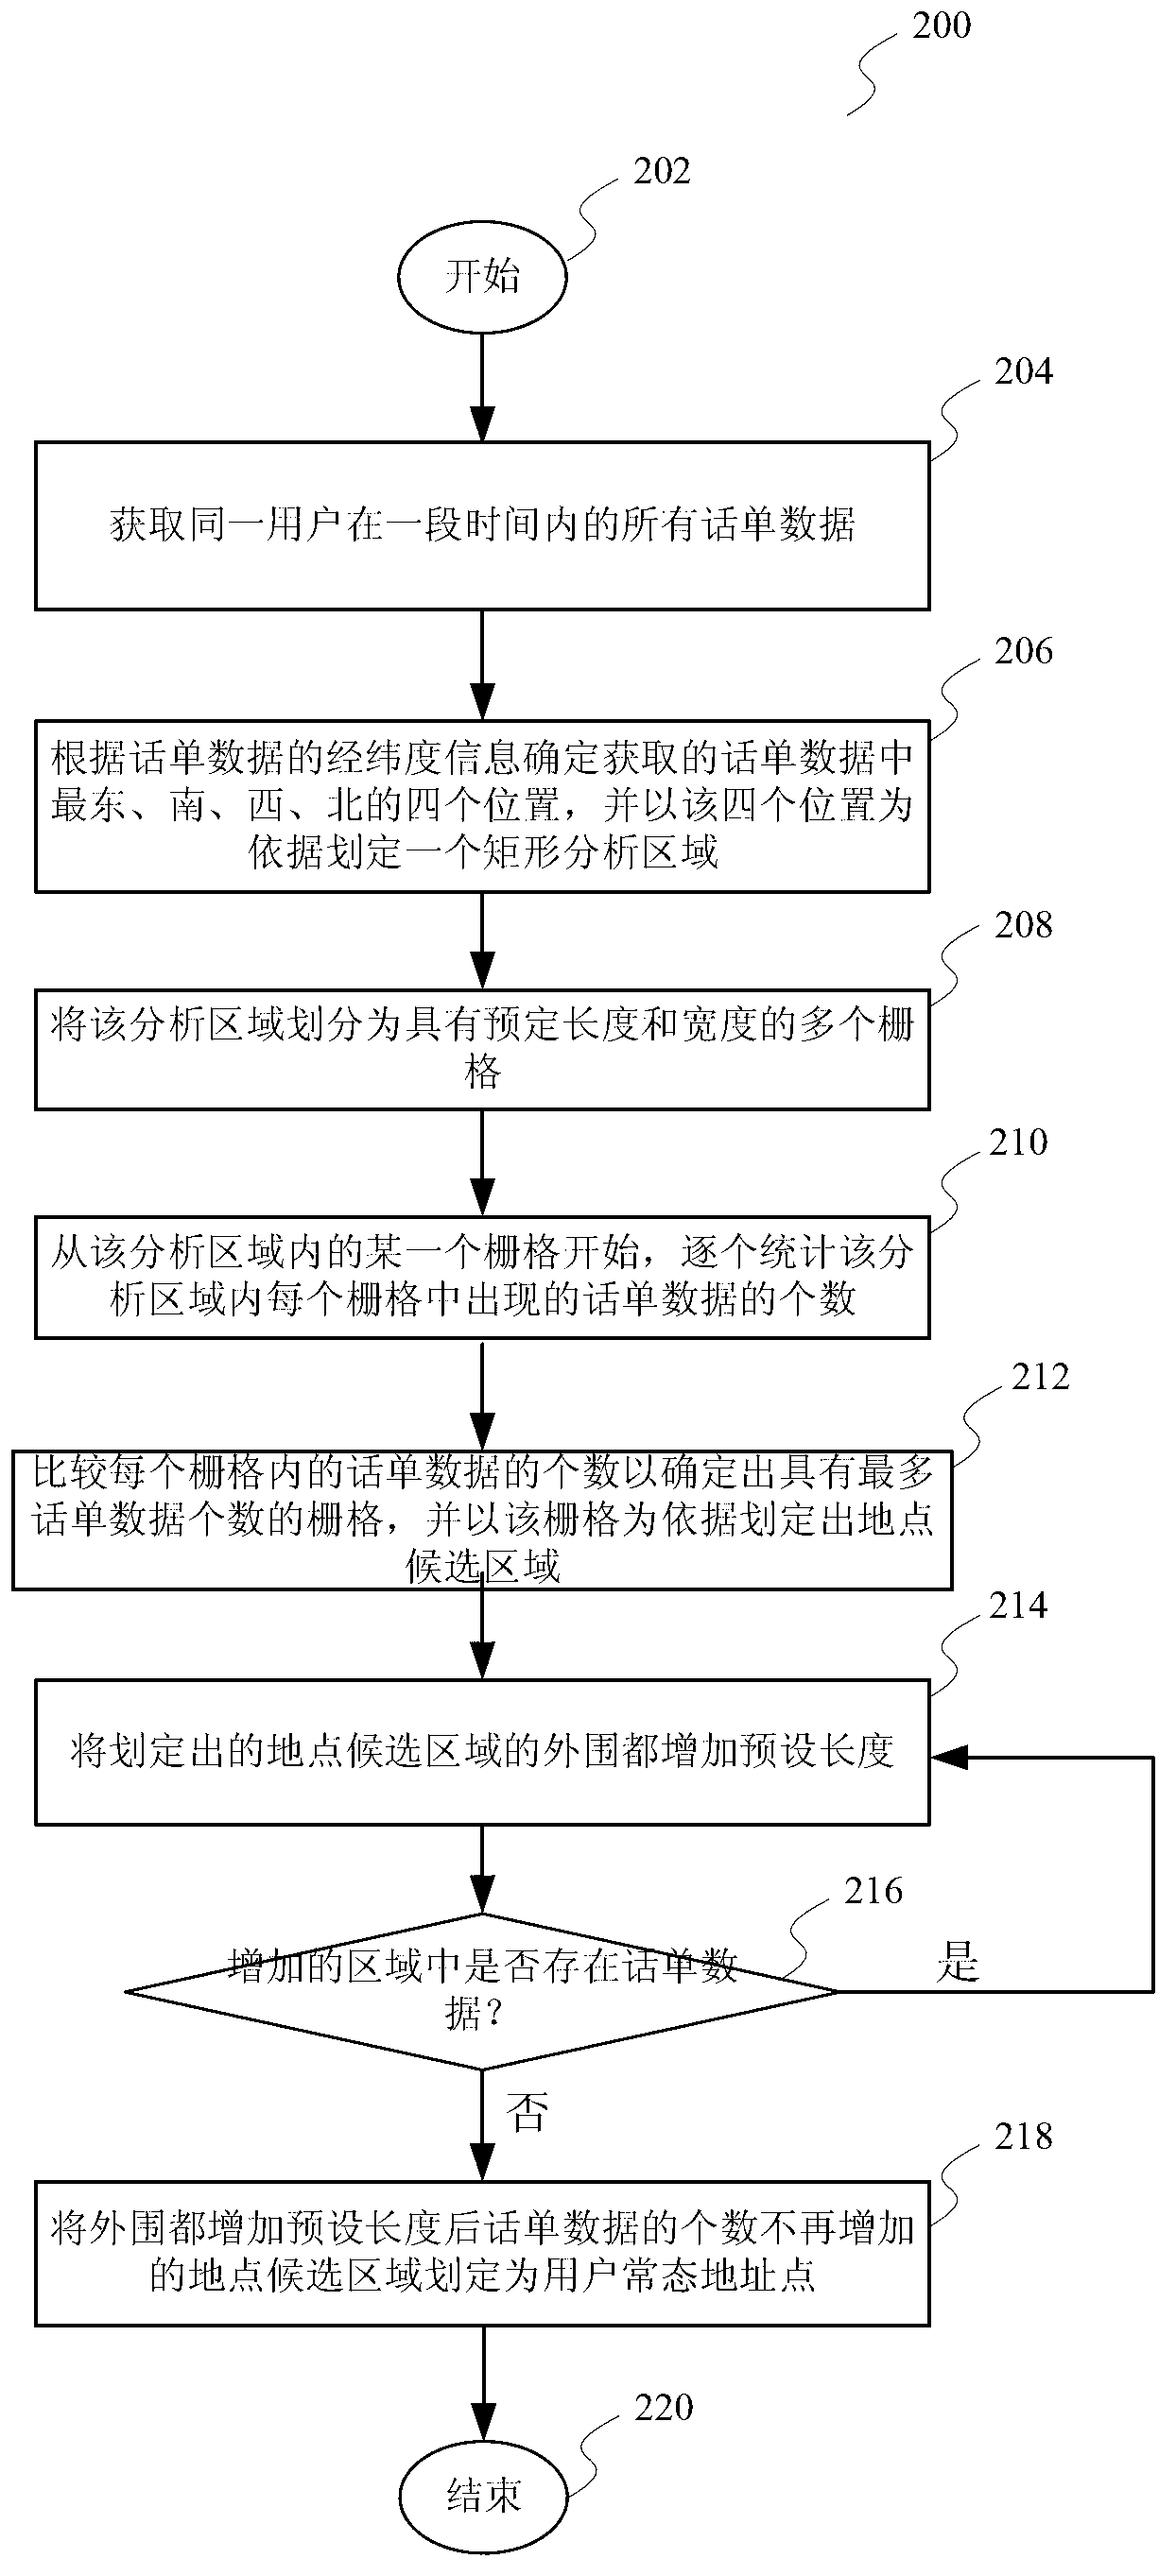 Method for determining normal-state address point of user and method for carrying out call bill data analysis based on same